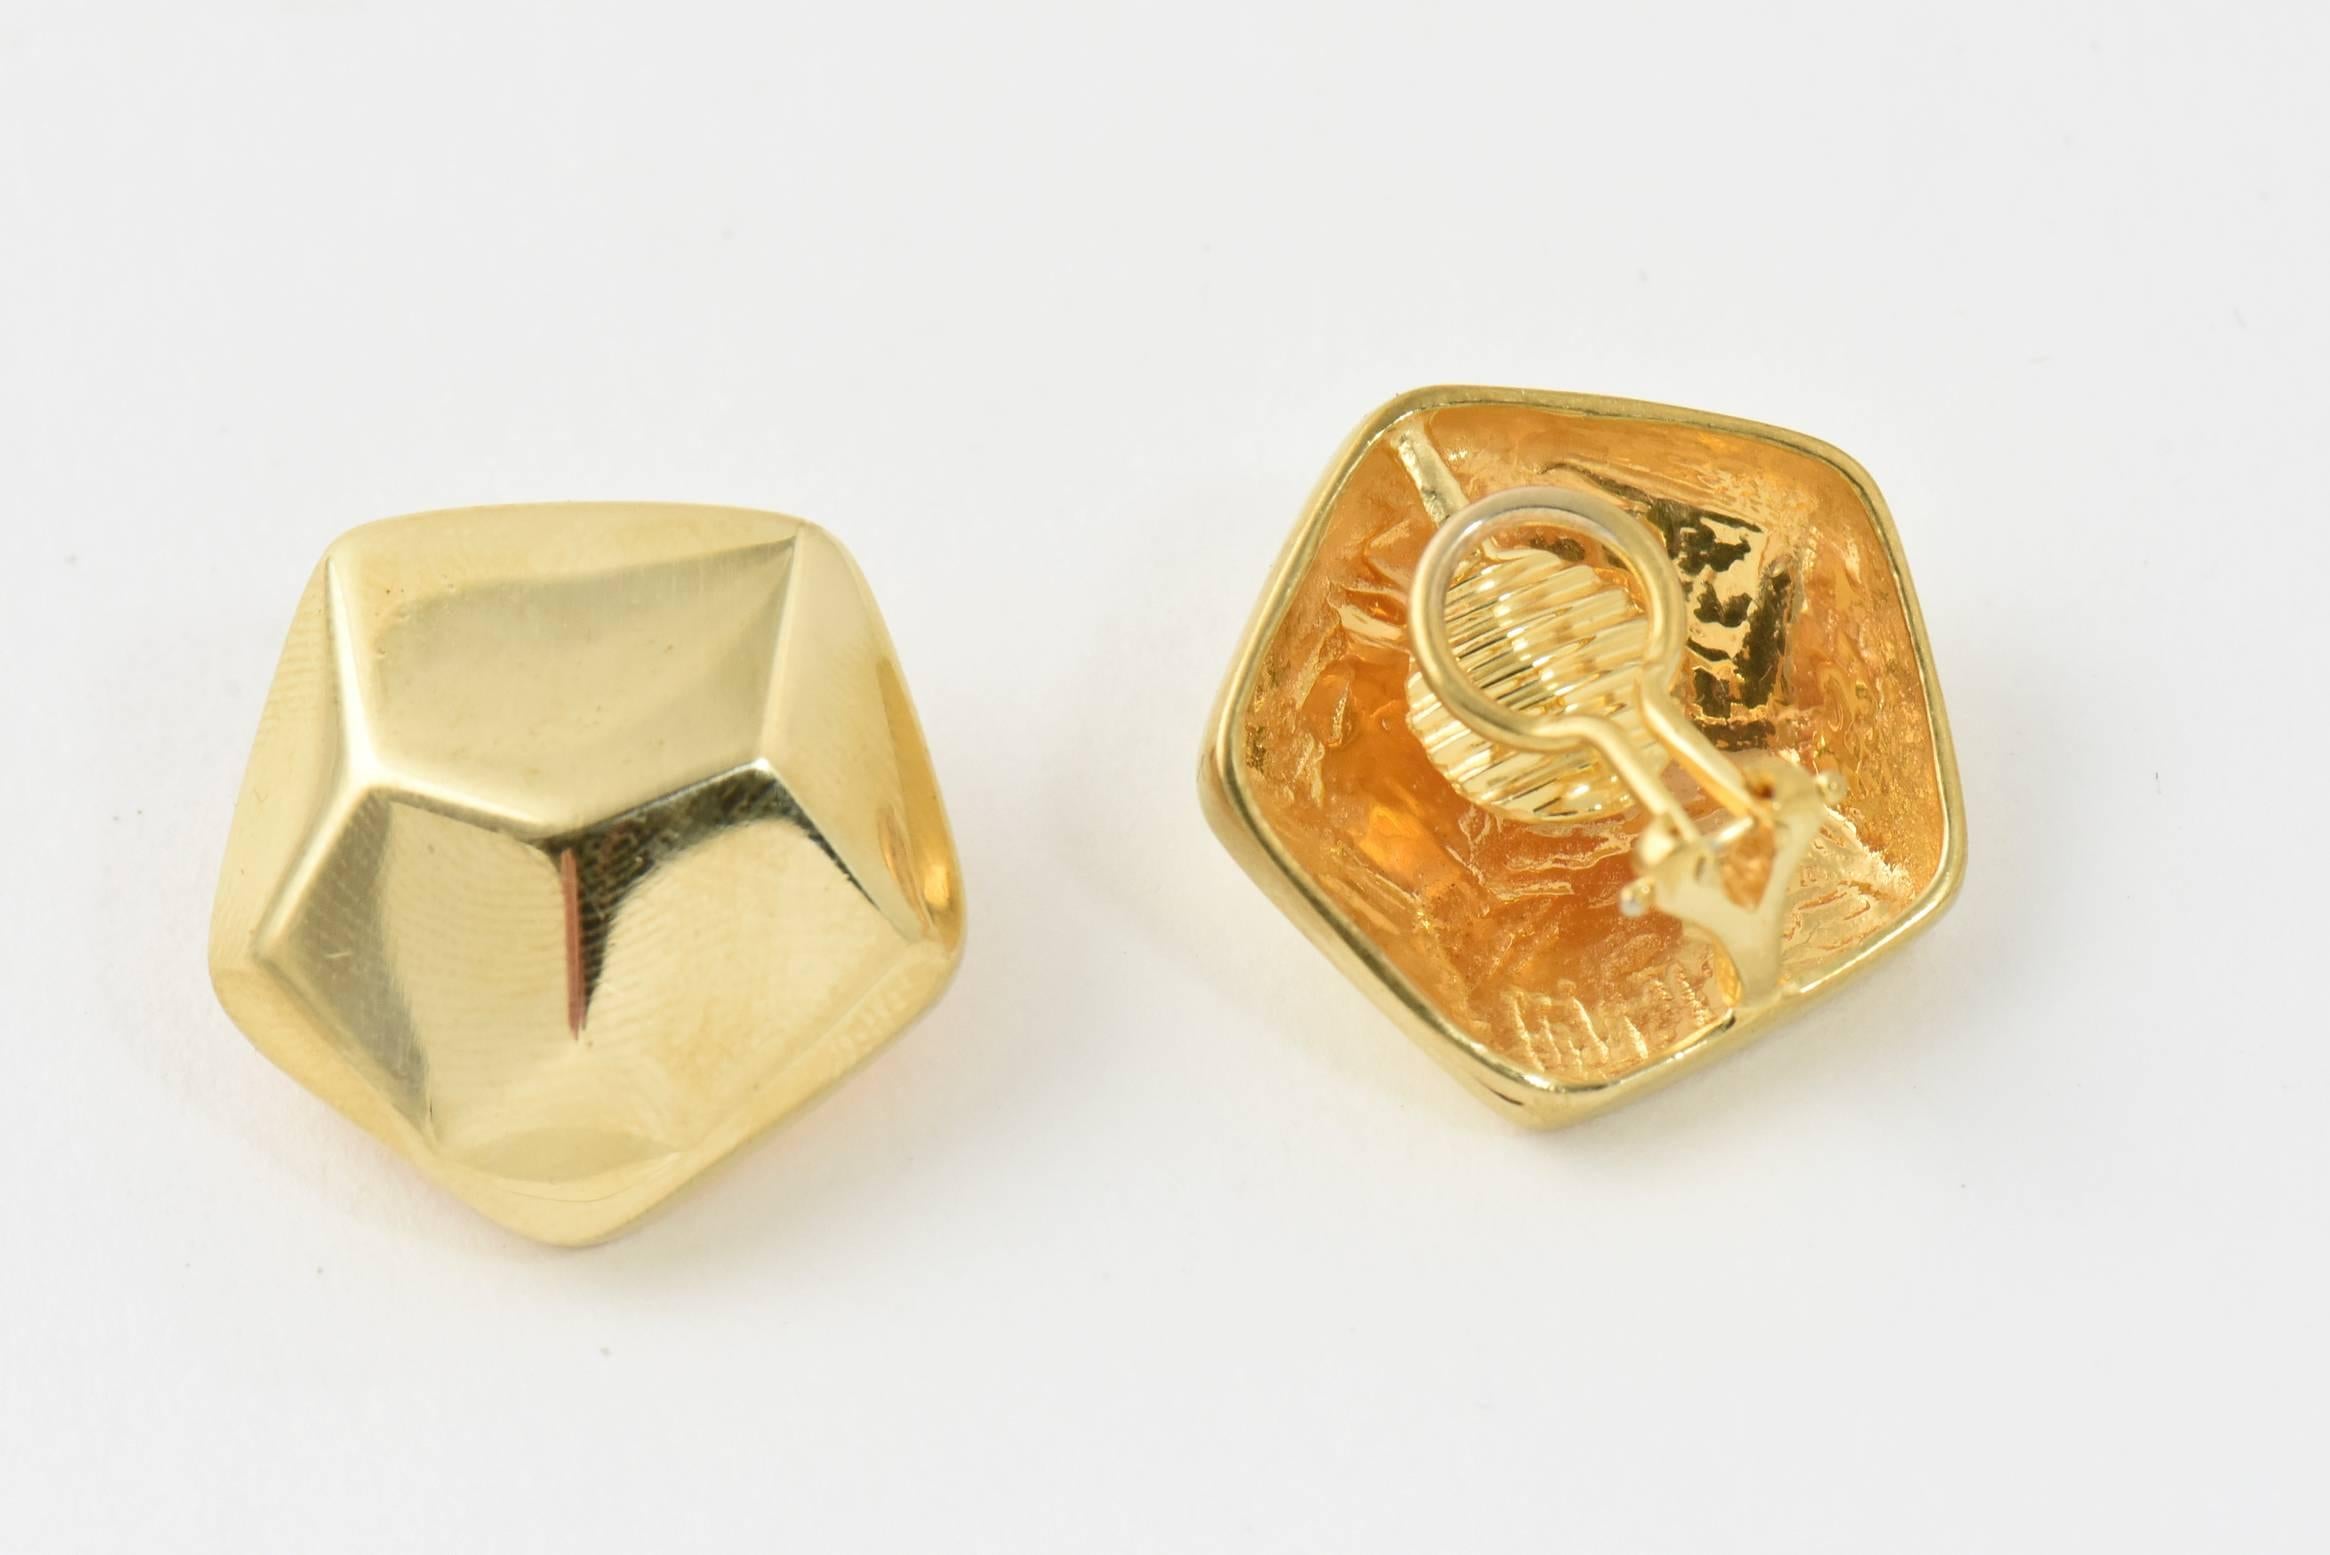 Geometric Three Dimensional Pentagon Gold Earrings In Excellent Condition For Sale In Miami Beach, FL